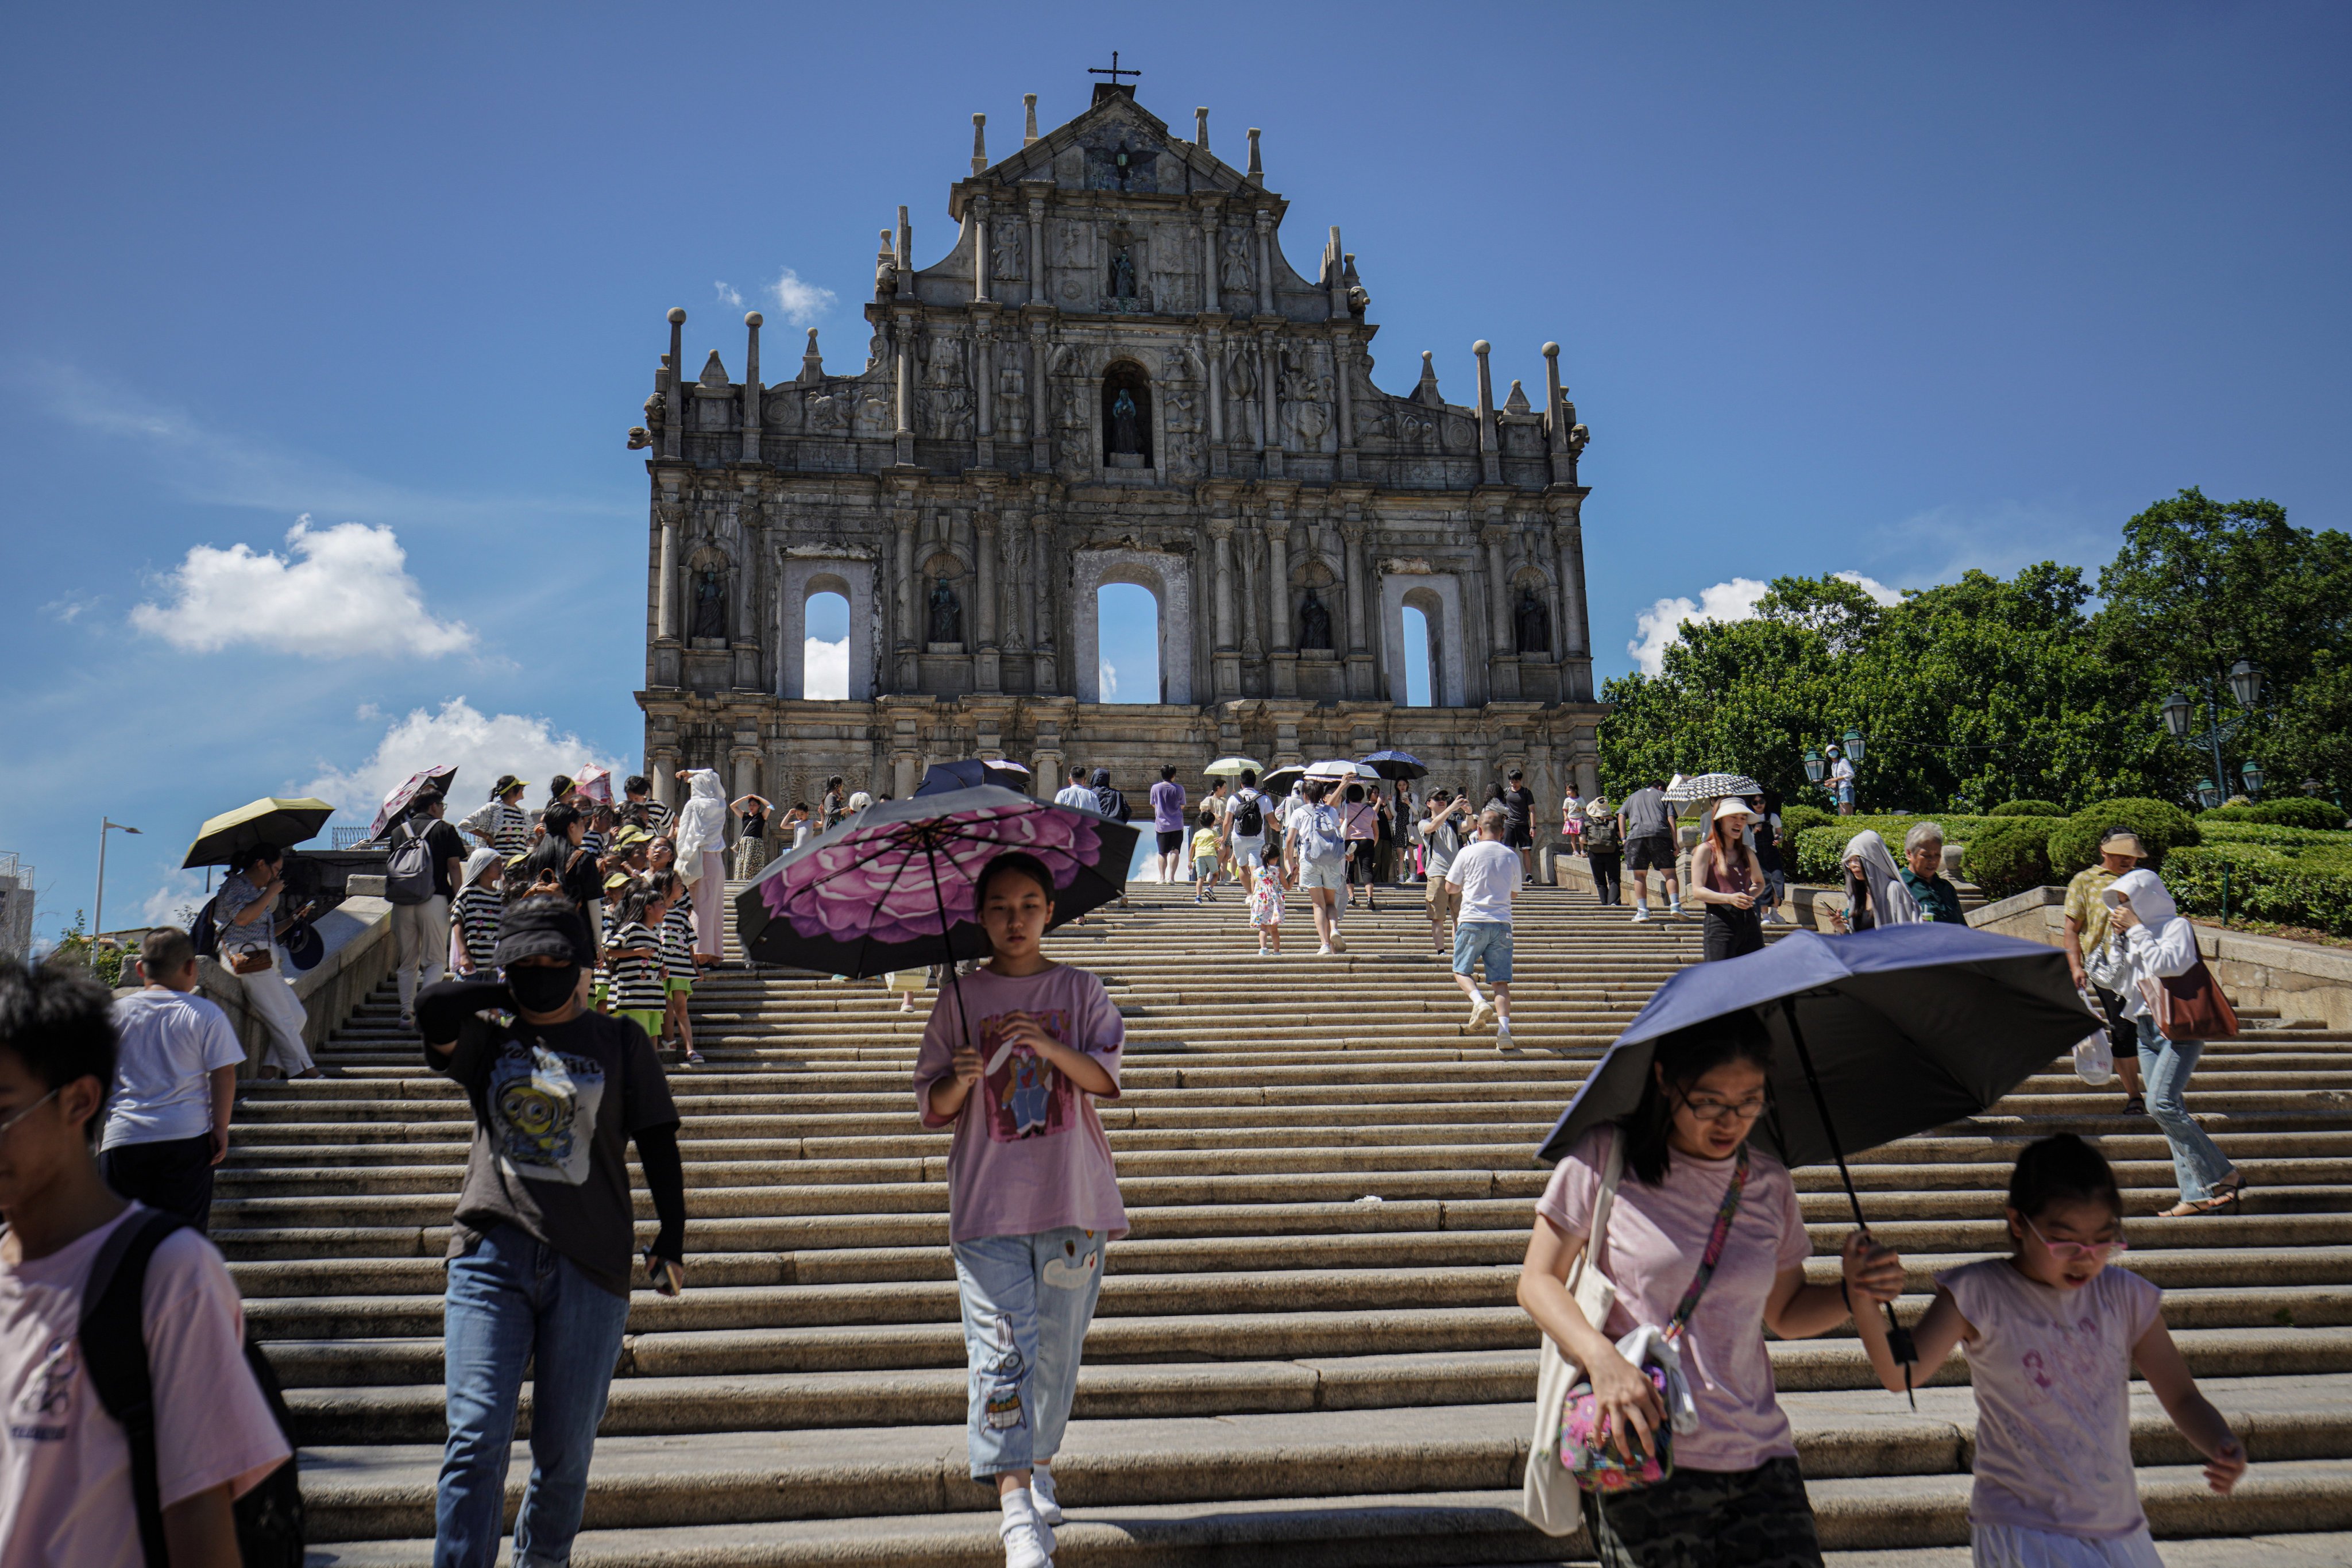 Tourists visit the Ruins of St Paul’s in Macau. “Hong Kong has always been a ‘big brother’ to Macau,” the city’s leader told members of the media on Monday. Photo: Getty Images